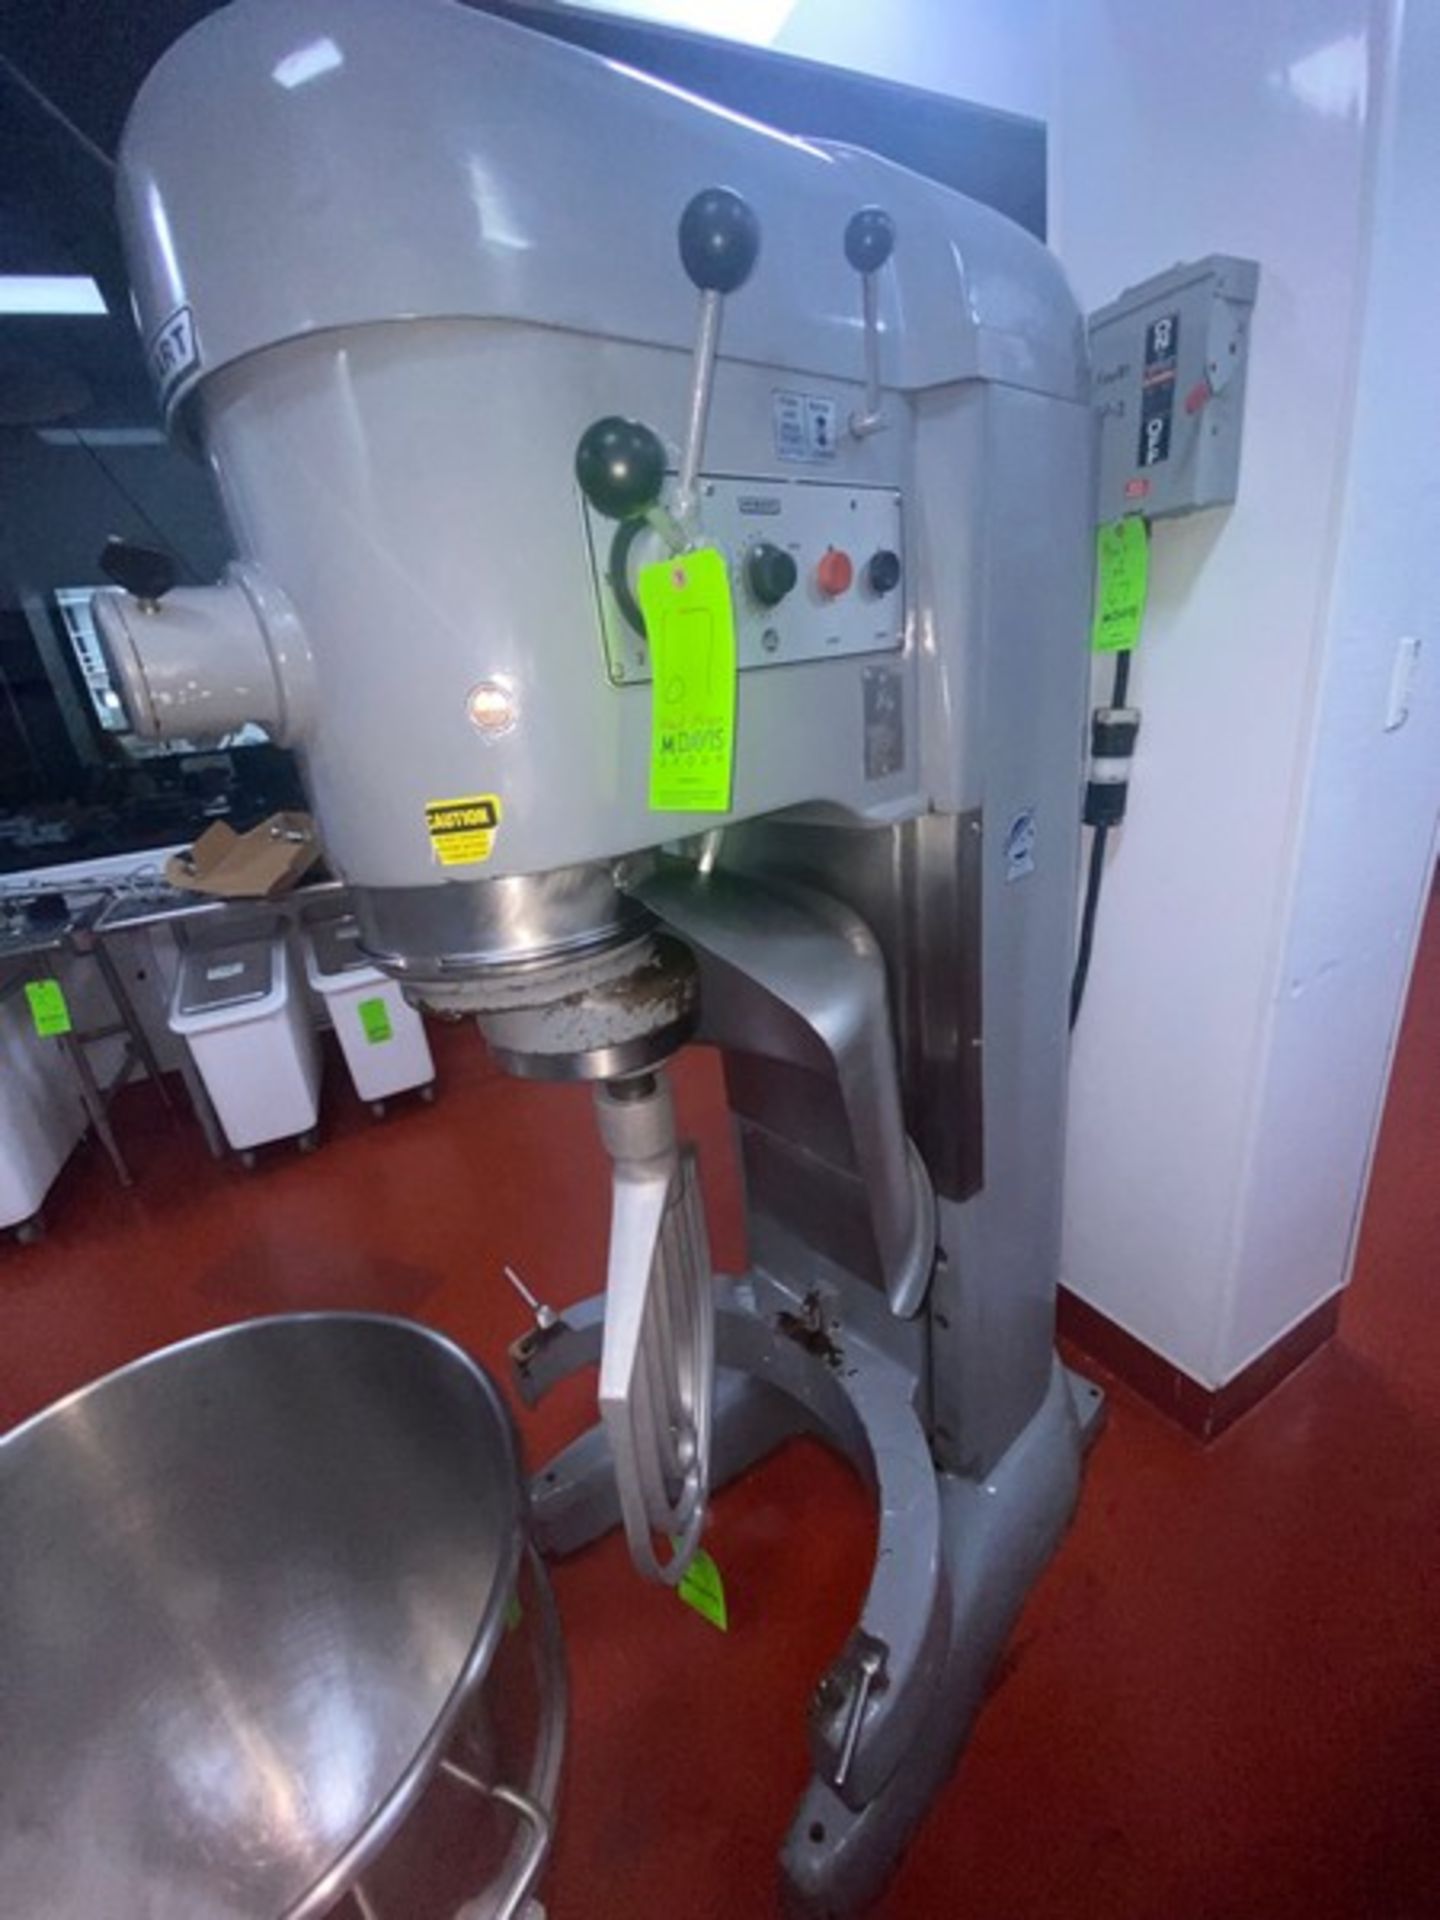 Hobart Mixer, M/N V-1401U, S/N 11-1014-844, 200 Volts, 3 Phase, 1725 RPM Motor, with S/S Mixing Bowl - Image 2 of 9